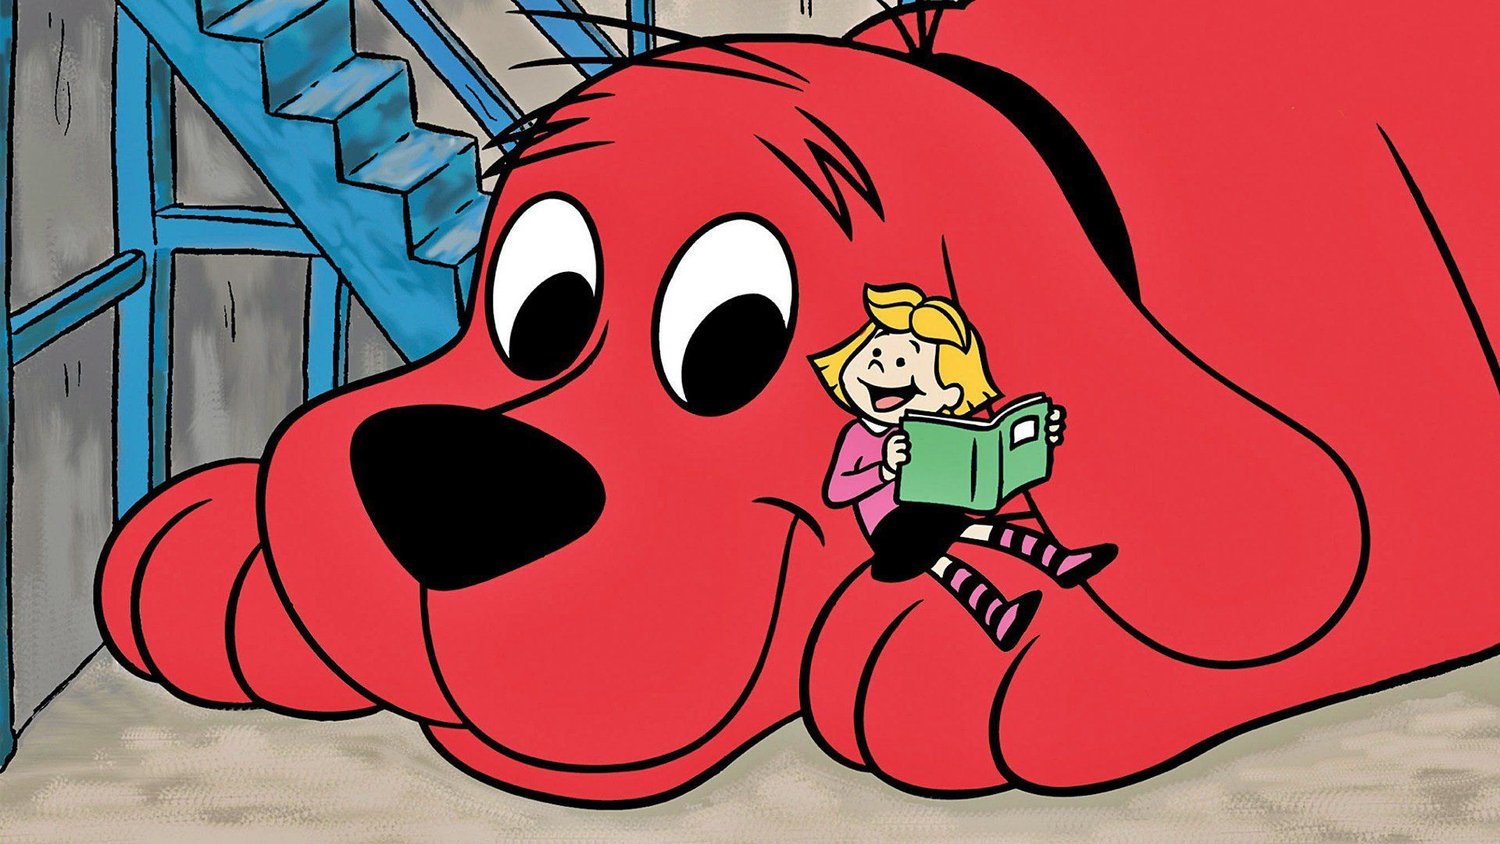 John cleese kenan thompson and more join clifford the big red dog â